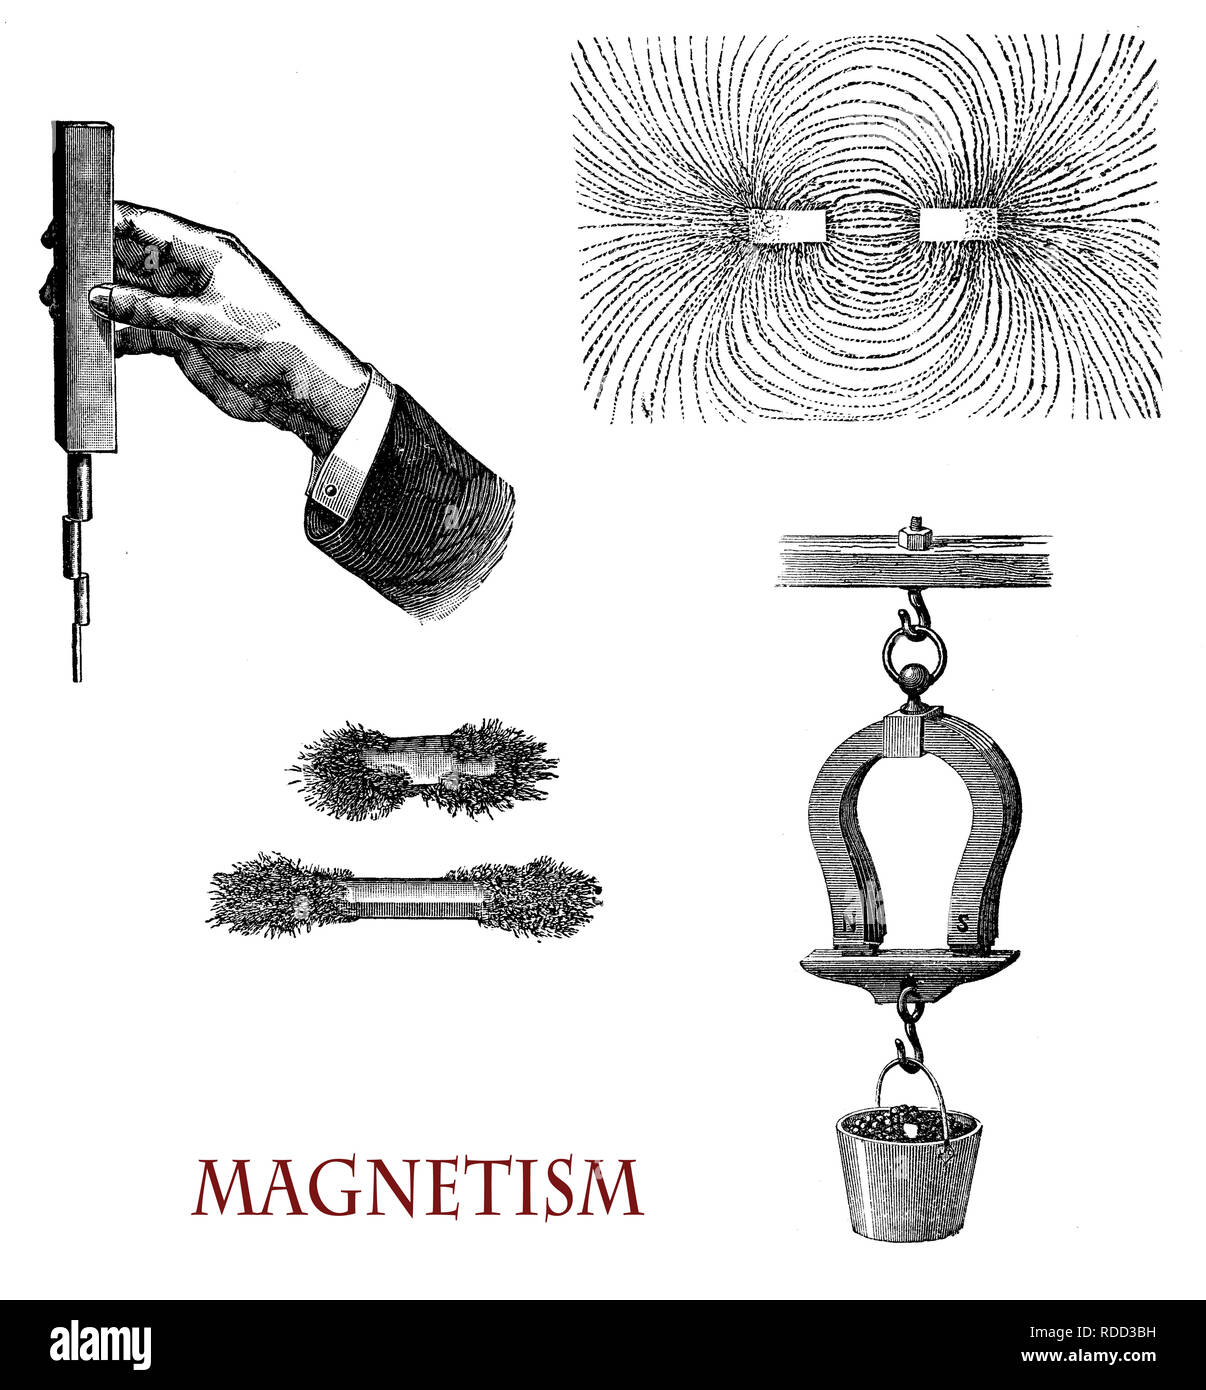 Physics lab applications:ferromagnetic materials are strongly attracted by magnetic fields and can be magnetized to become permanent magnets, producing magnetic fields themselves Stock Photo